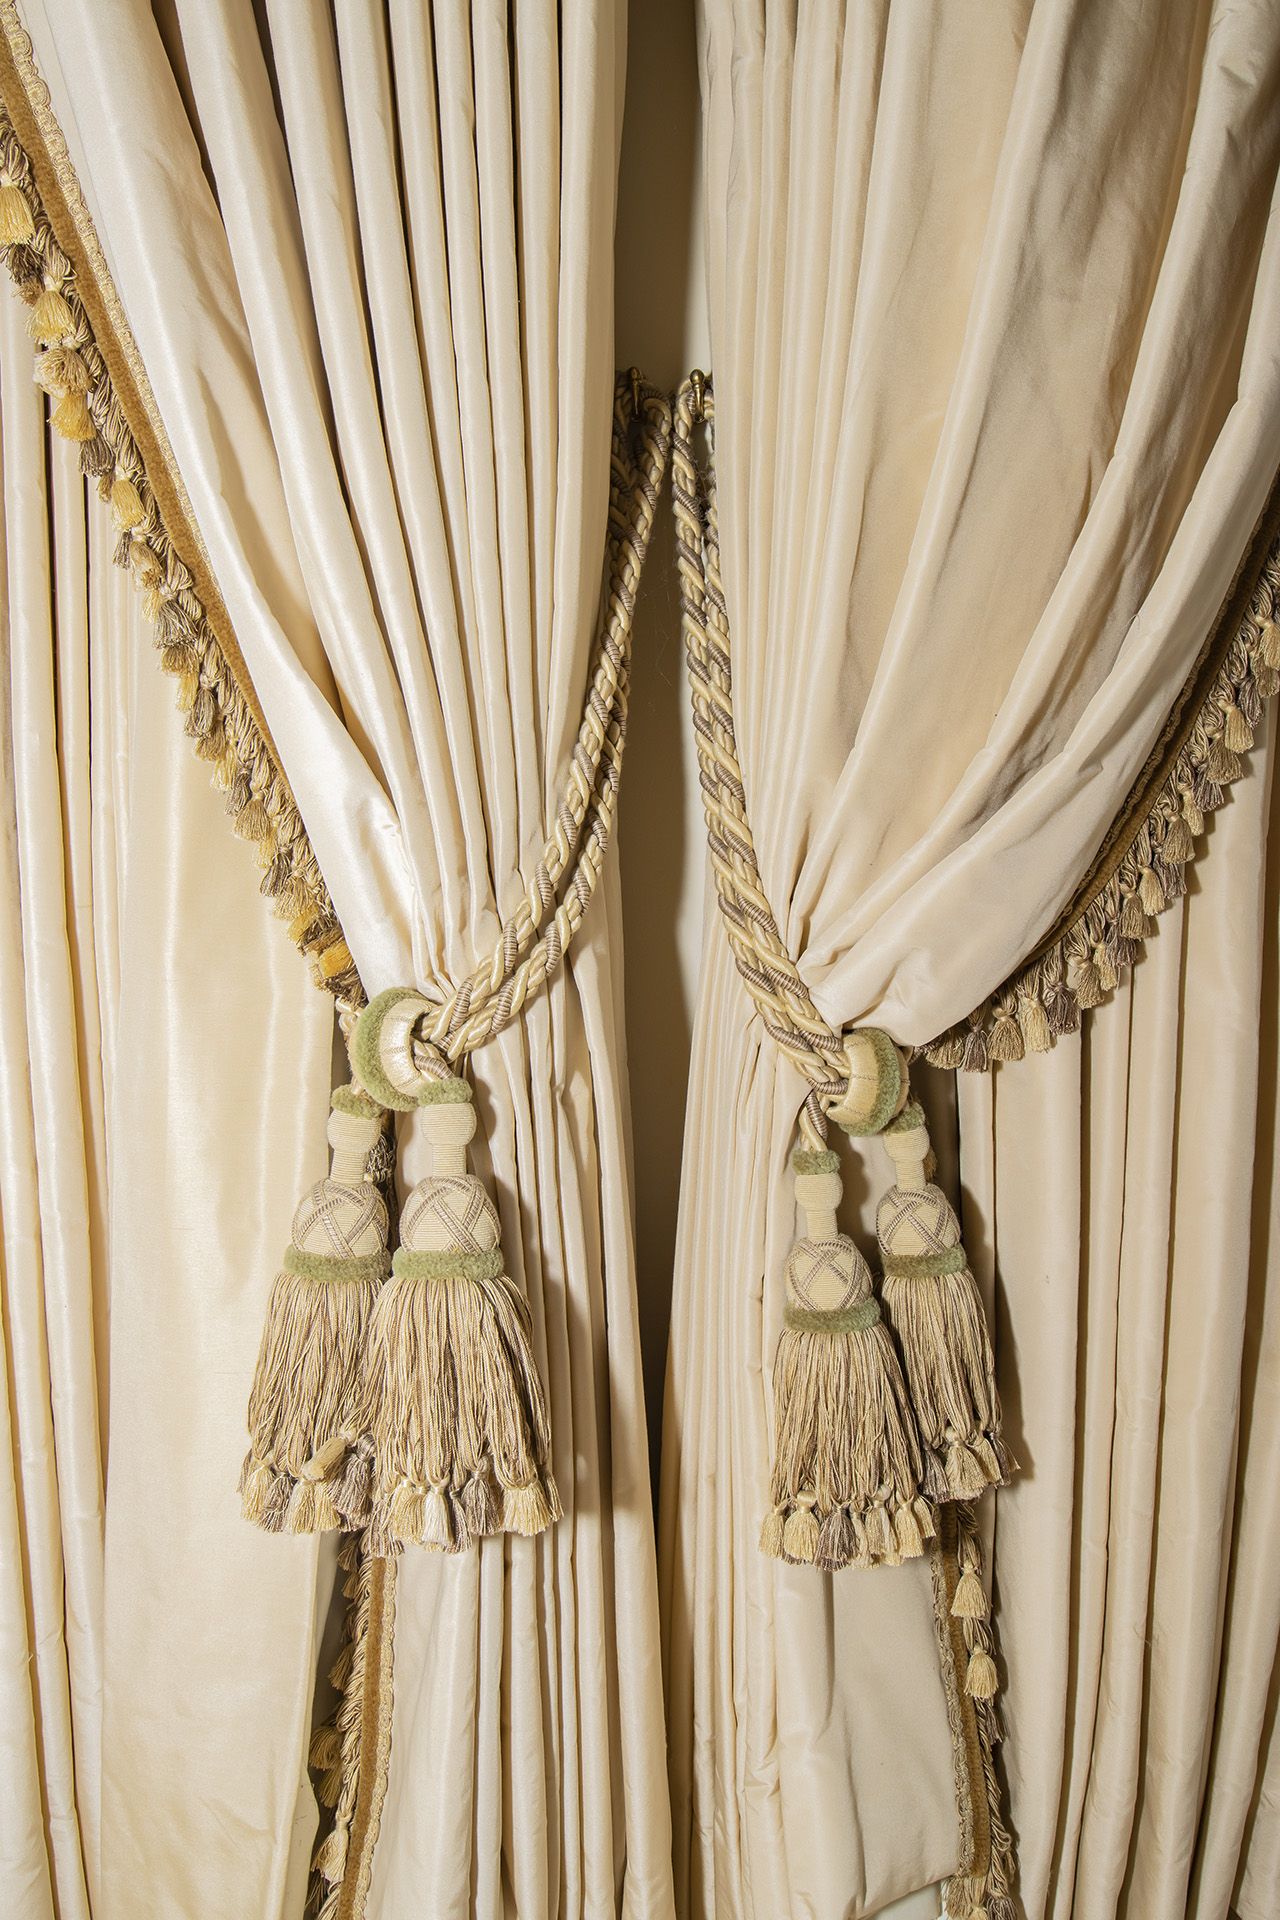 Silk cream drapes with pelmet and swags spans an area of 5m french door and windows - Image 7 of 9